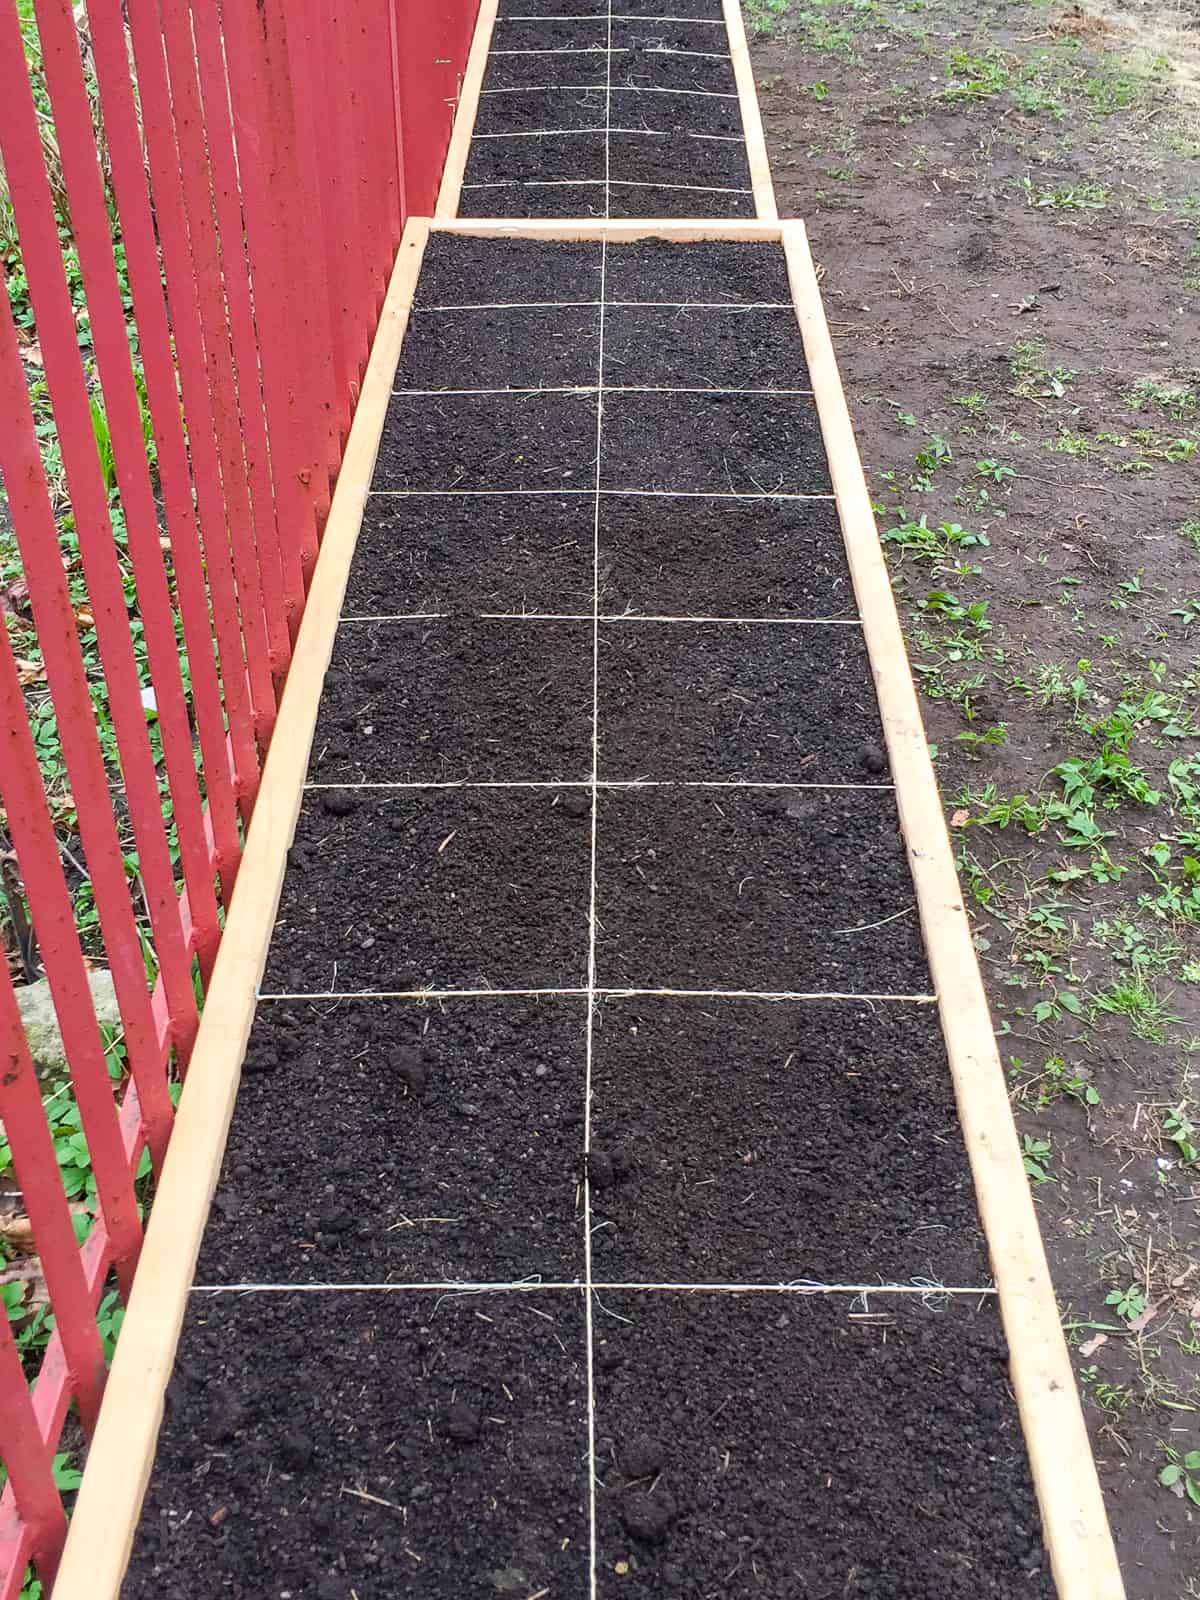 An image of a square foot garden bed gridded off with twine but empty of plants.